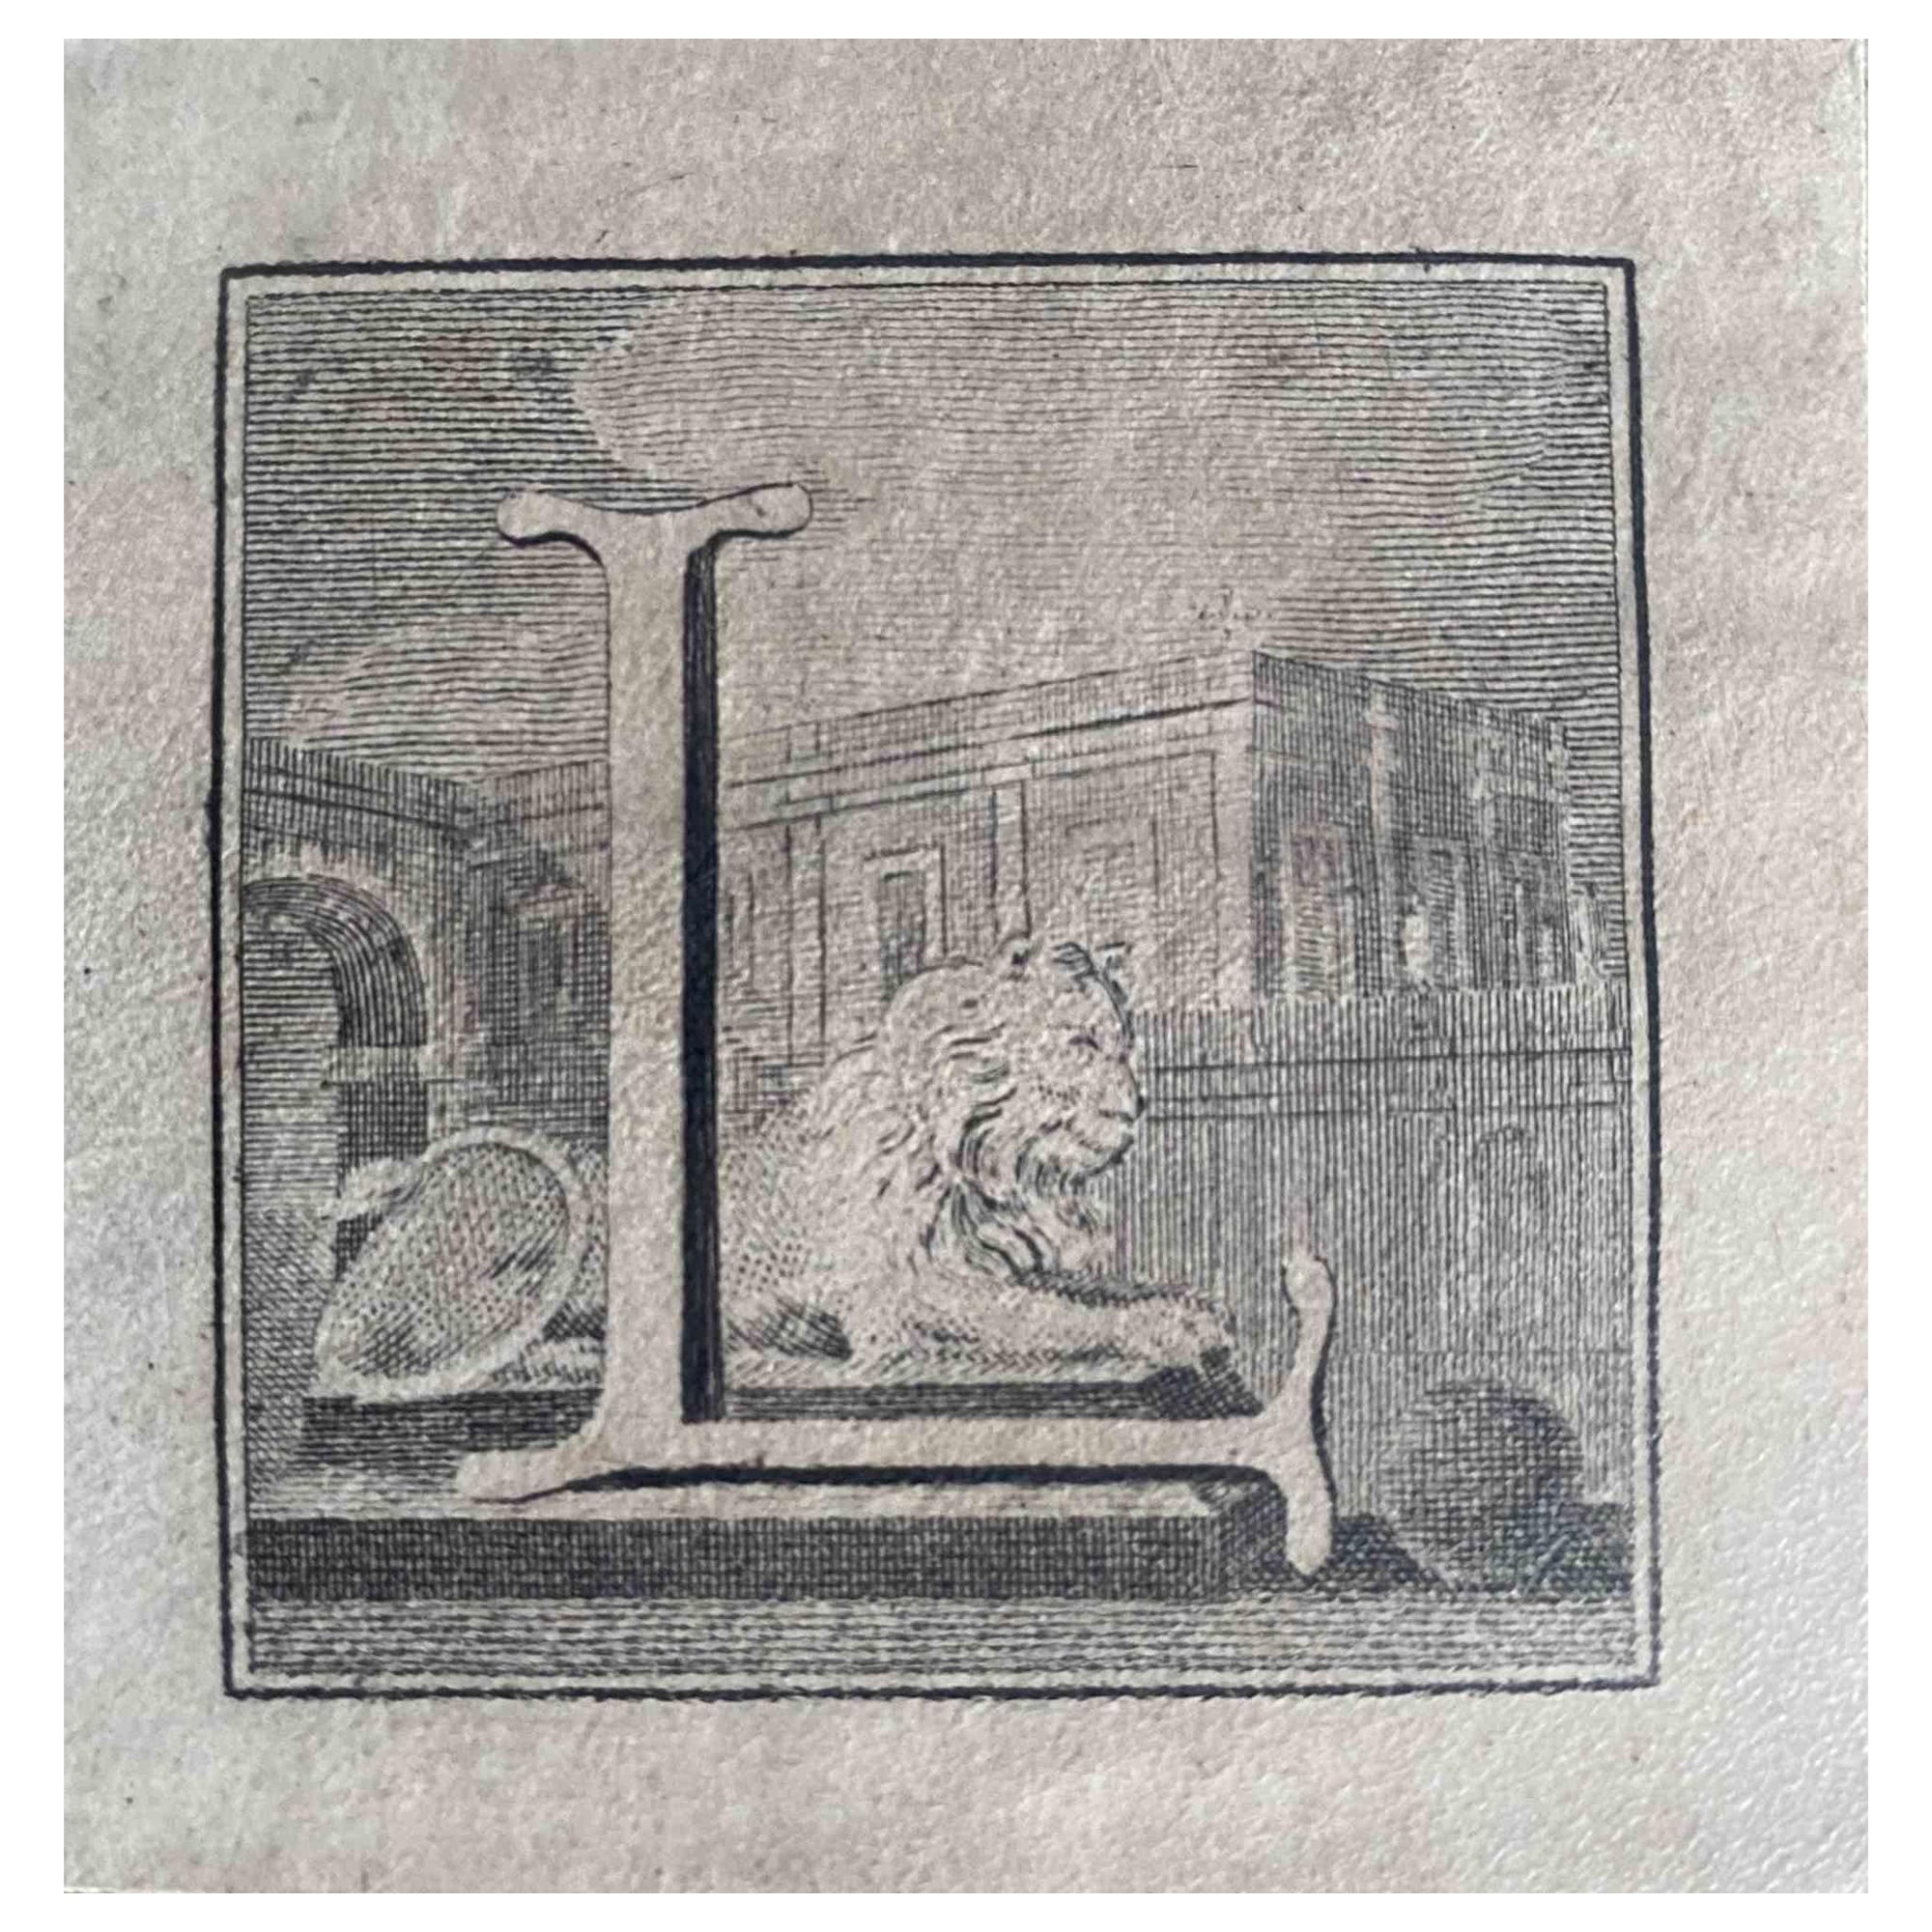 Unknown Figurative Print - Antiquities of Herculaneum -  Letter L - Etching  - 18th Century